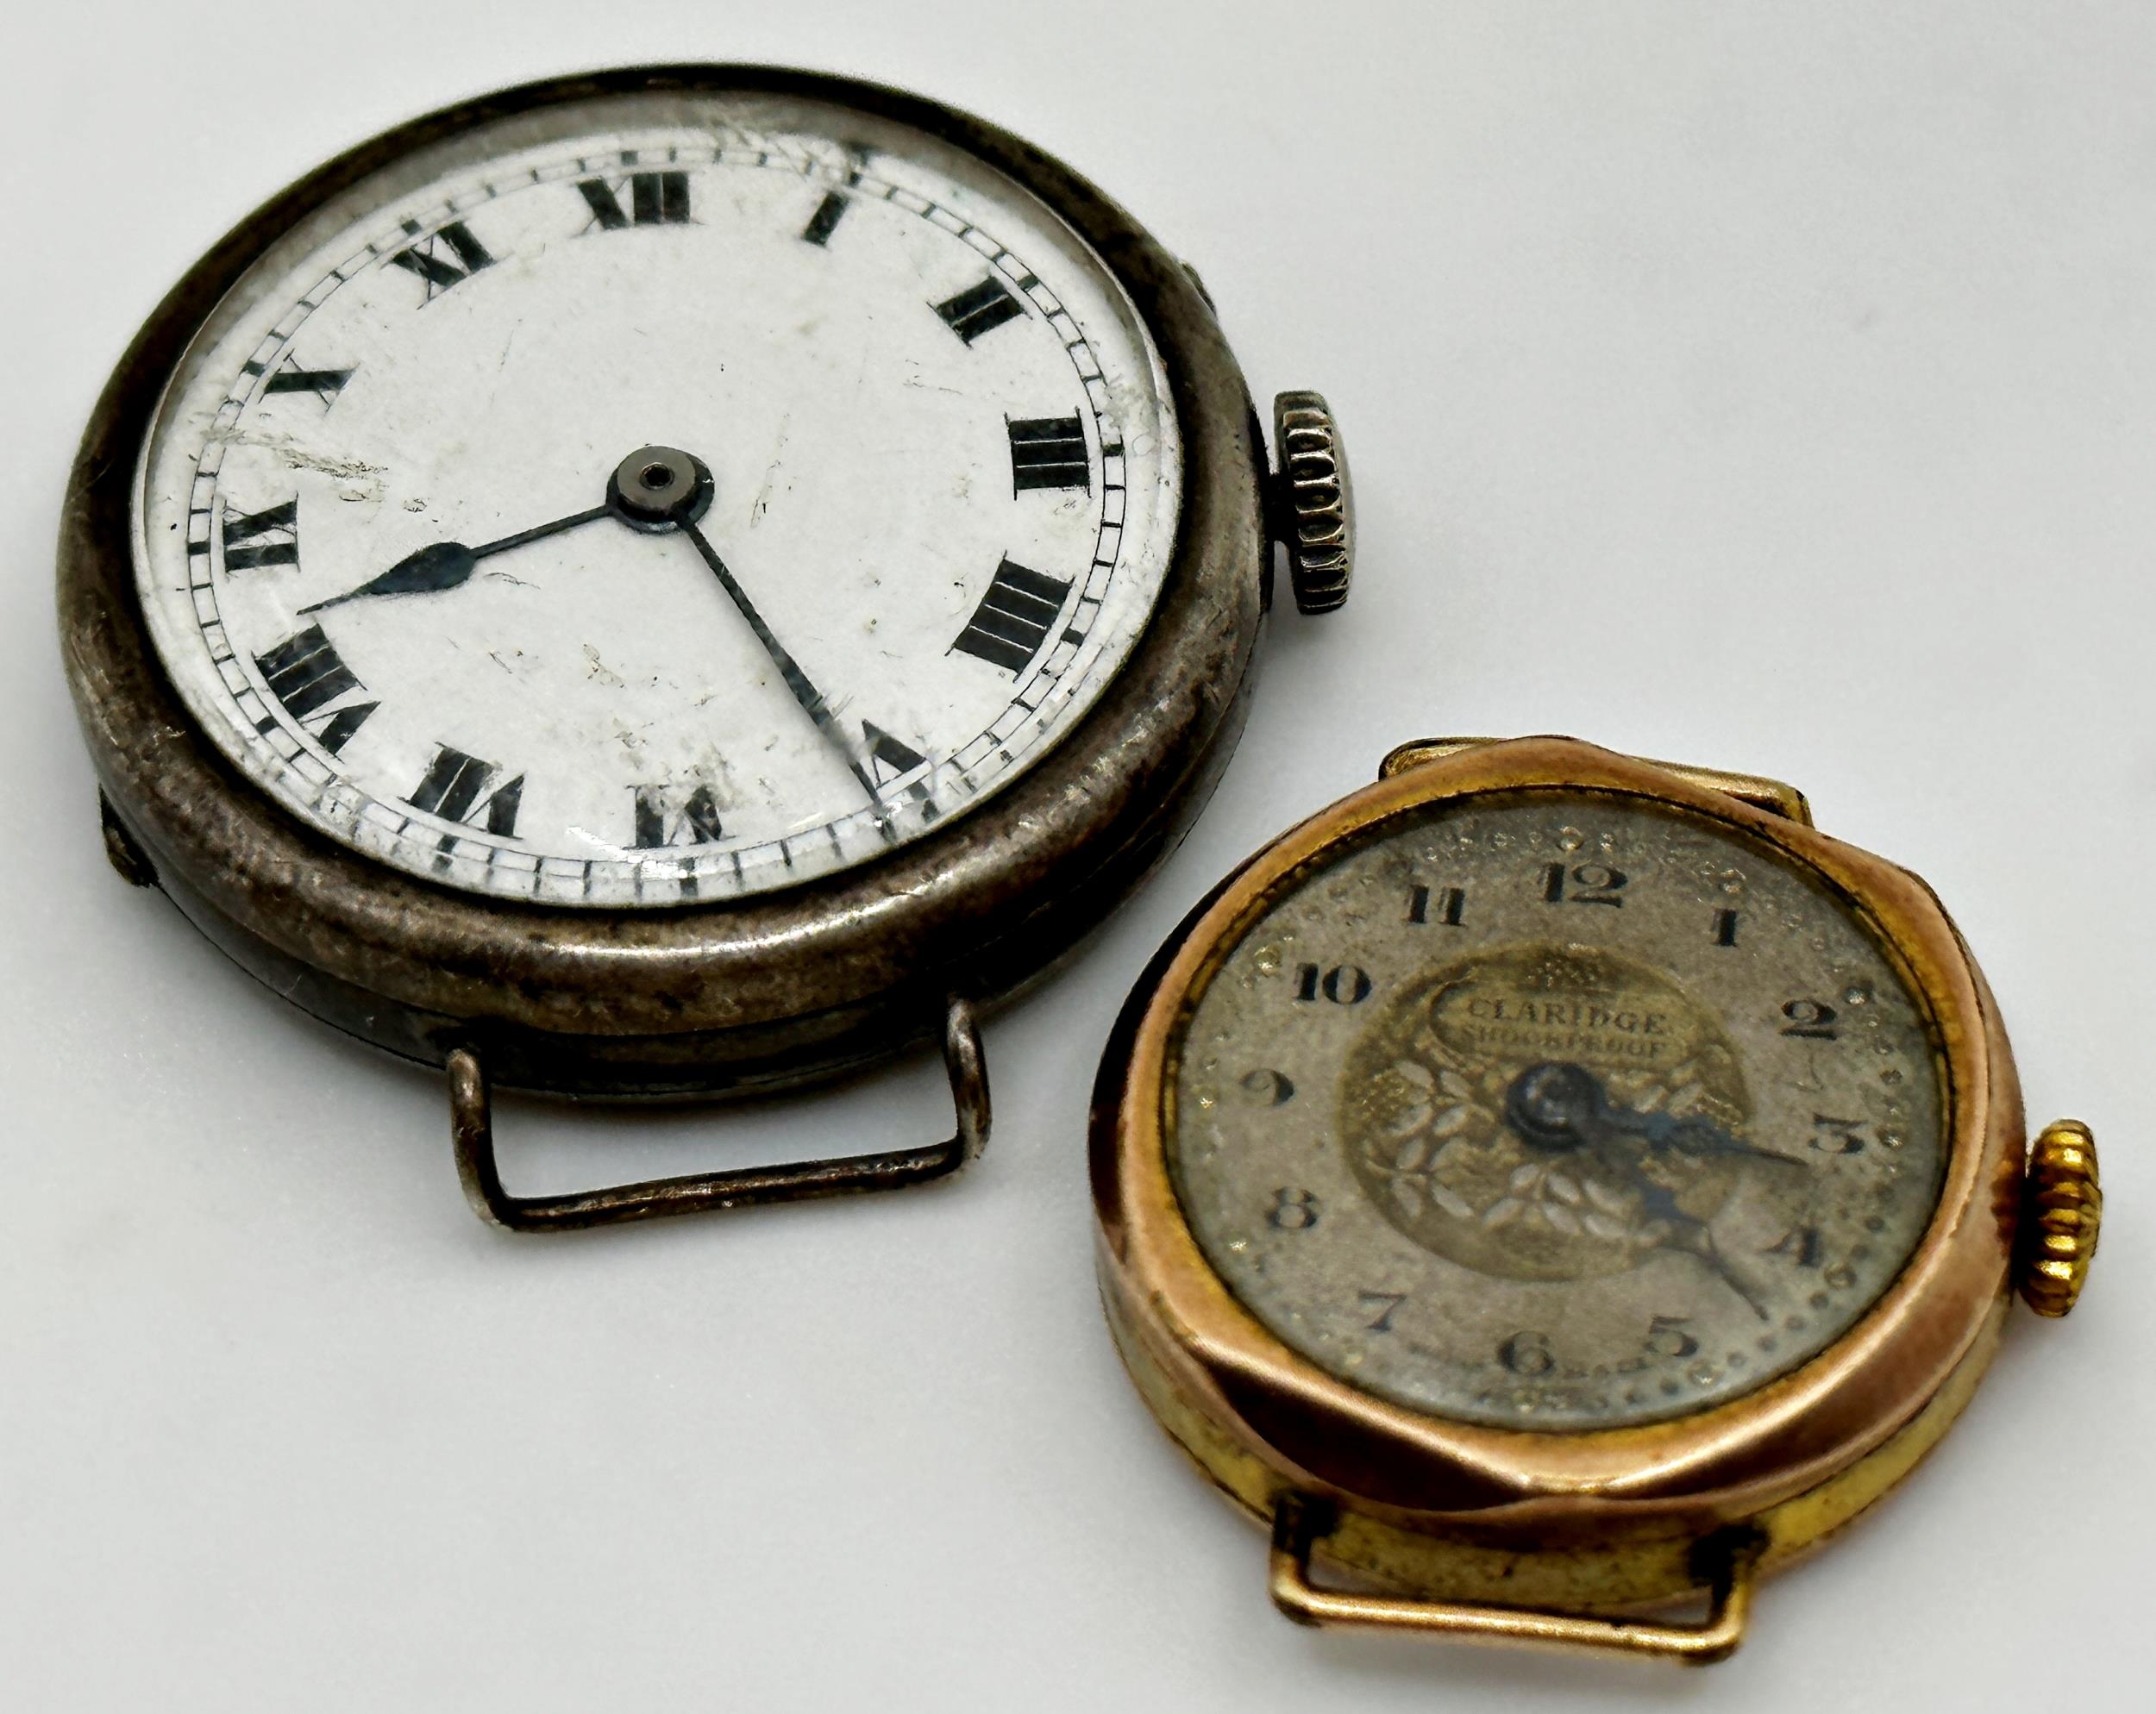 1920s 9ct gold cocktail watch by Claridge, with a further silver lug watch, 30g gross